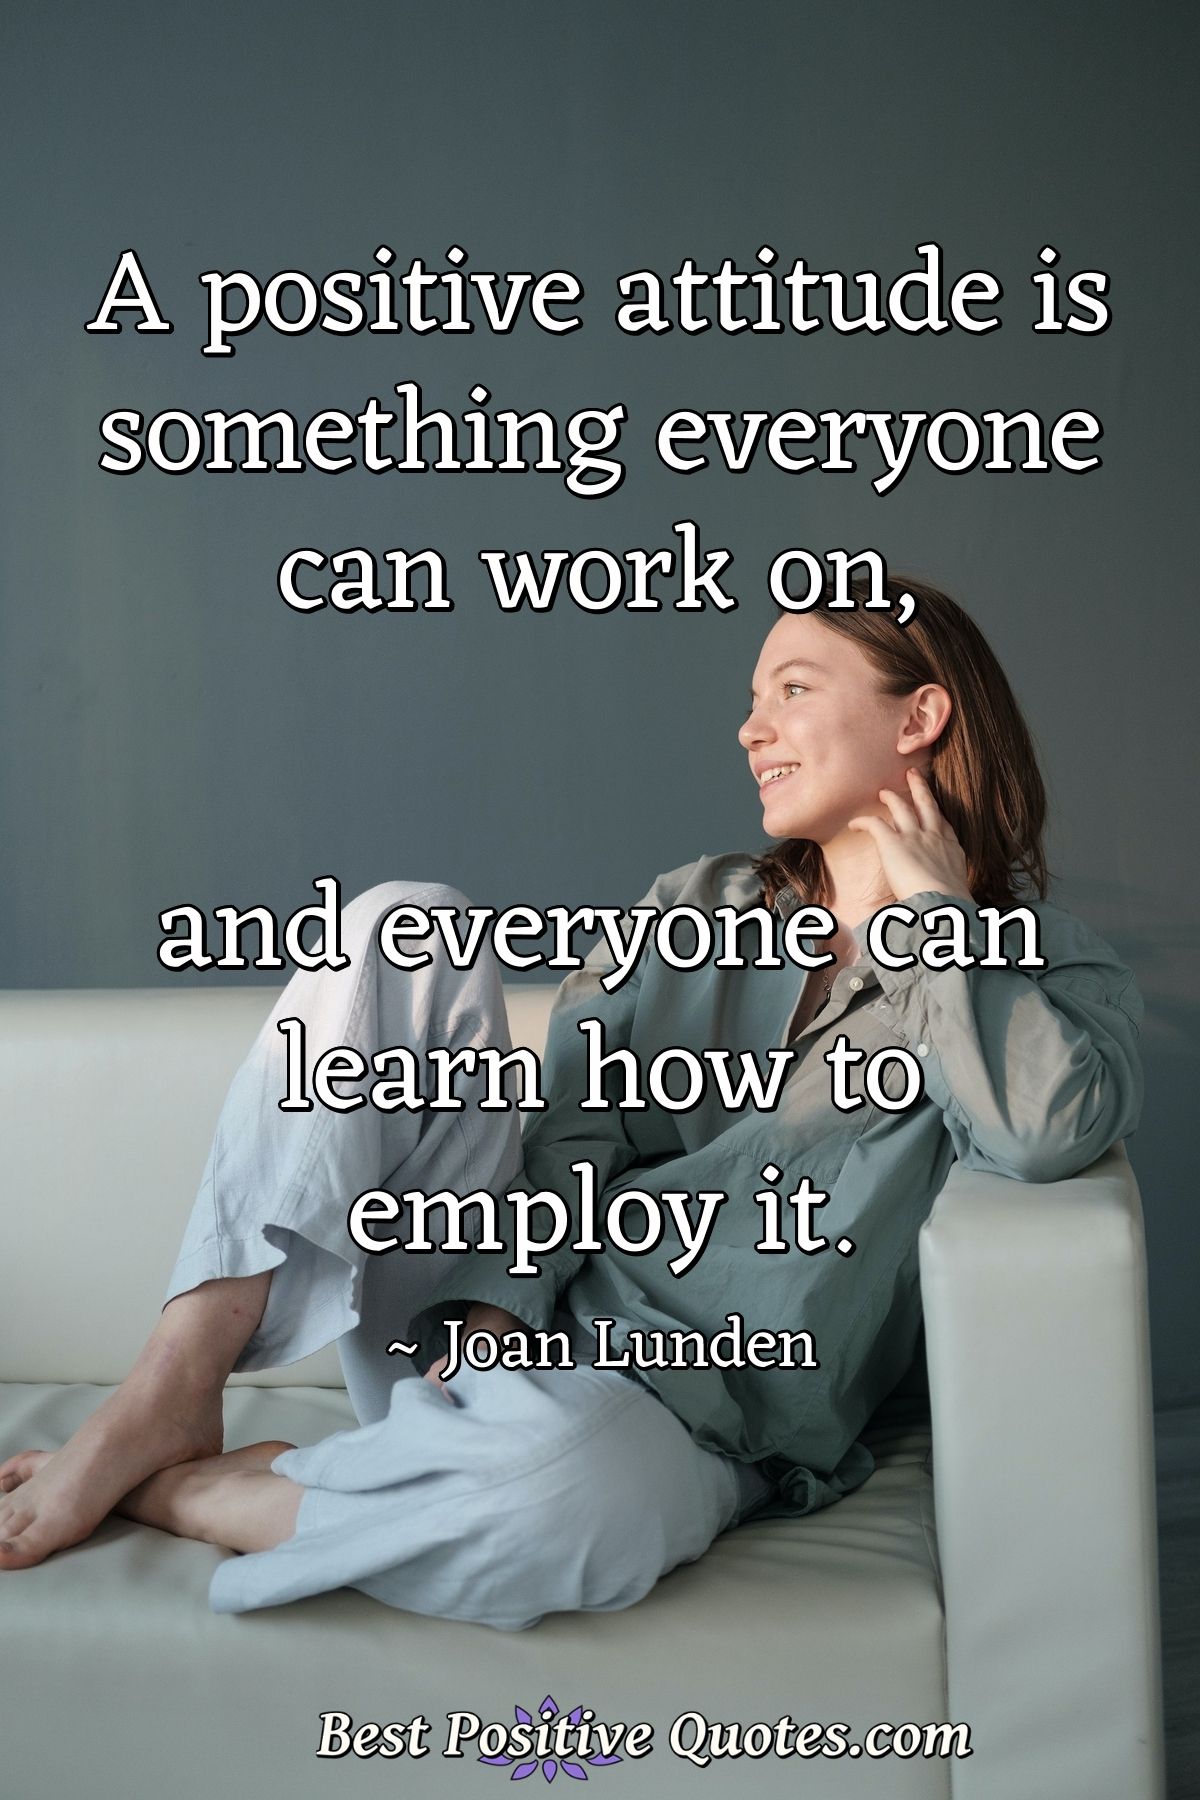 A positive attitude is something everyone can work on, and everyone can learn how to employ it. - Joan Lunden